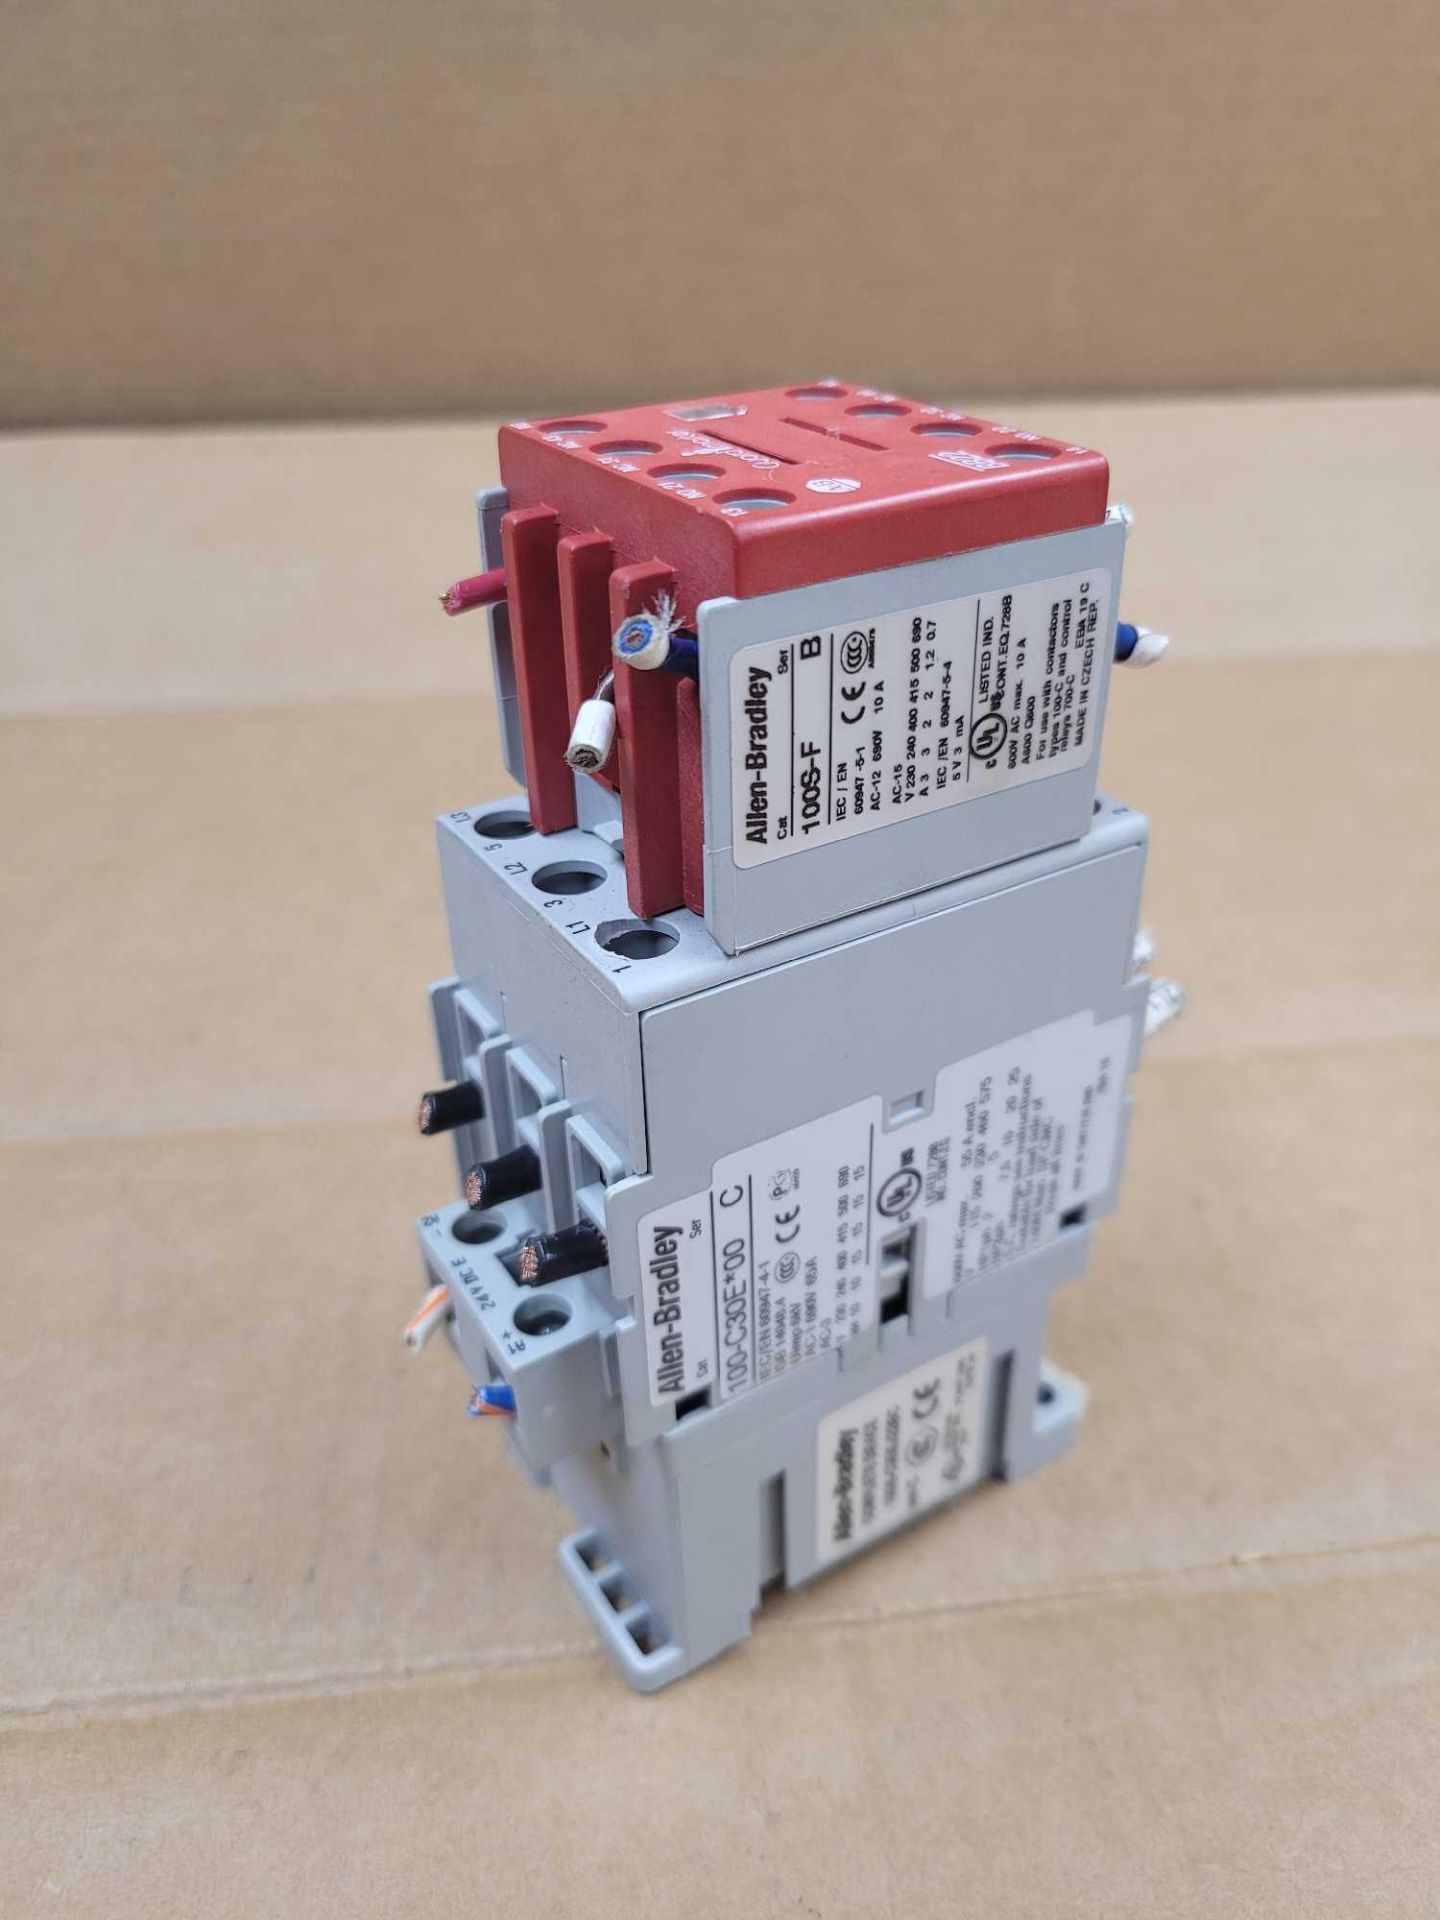 LOT OF 5 ALLEN BRADLEY 100S-C30EJ22BC / Series C Guardmaster Safety Contactor  /  Lot Weight: 6.0 lb - Image 3 of 8